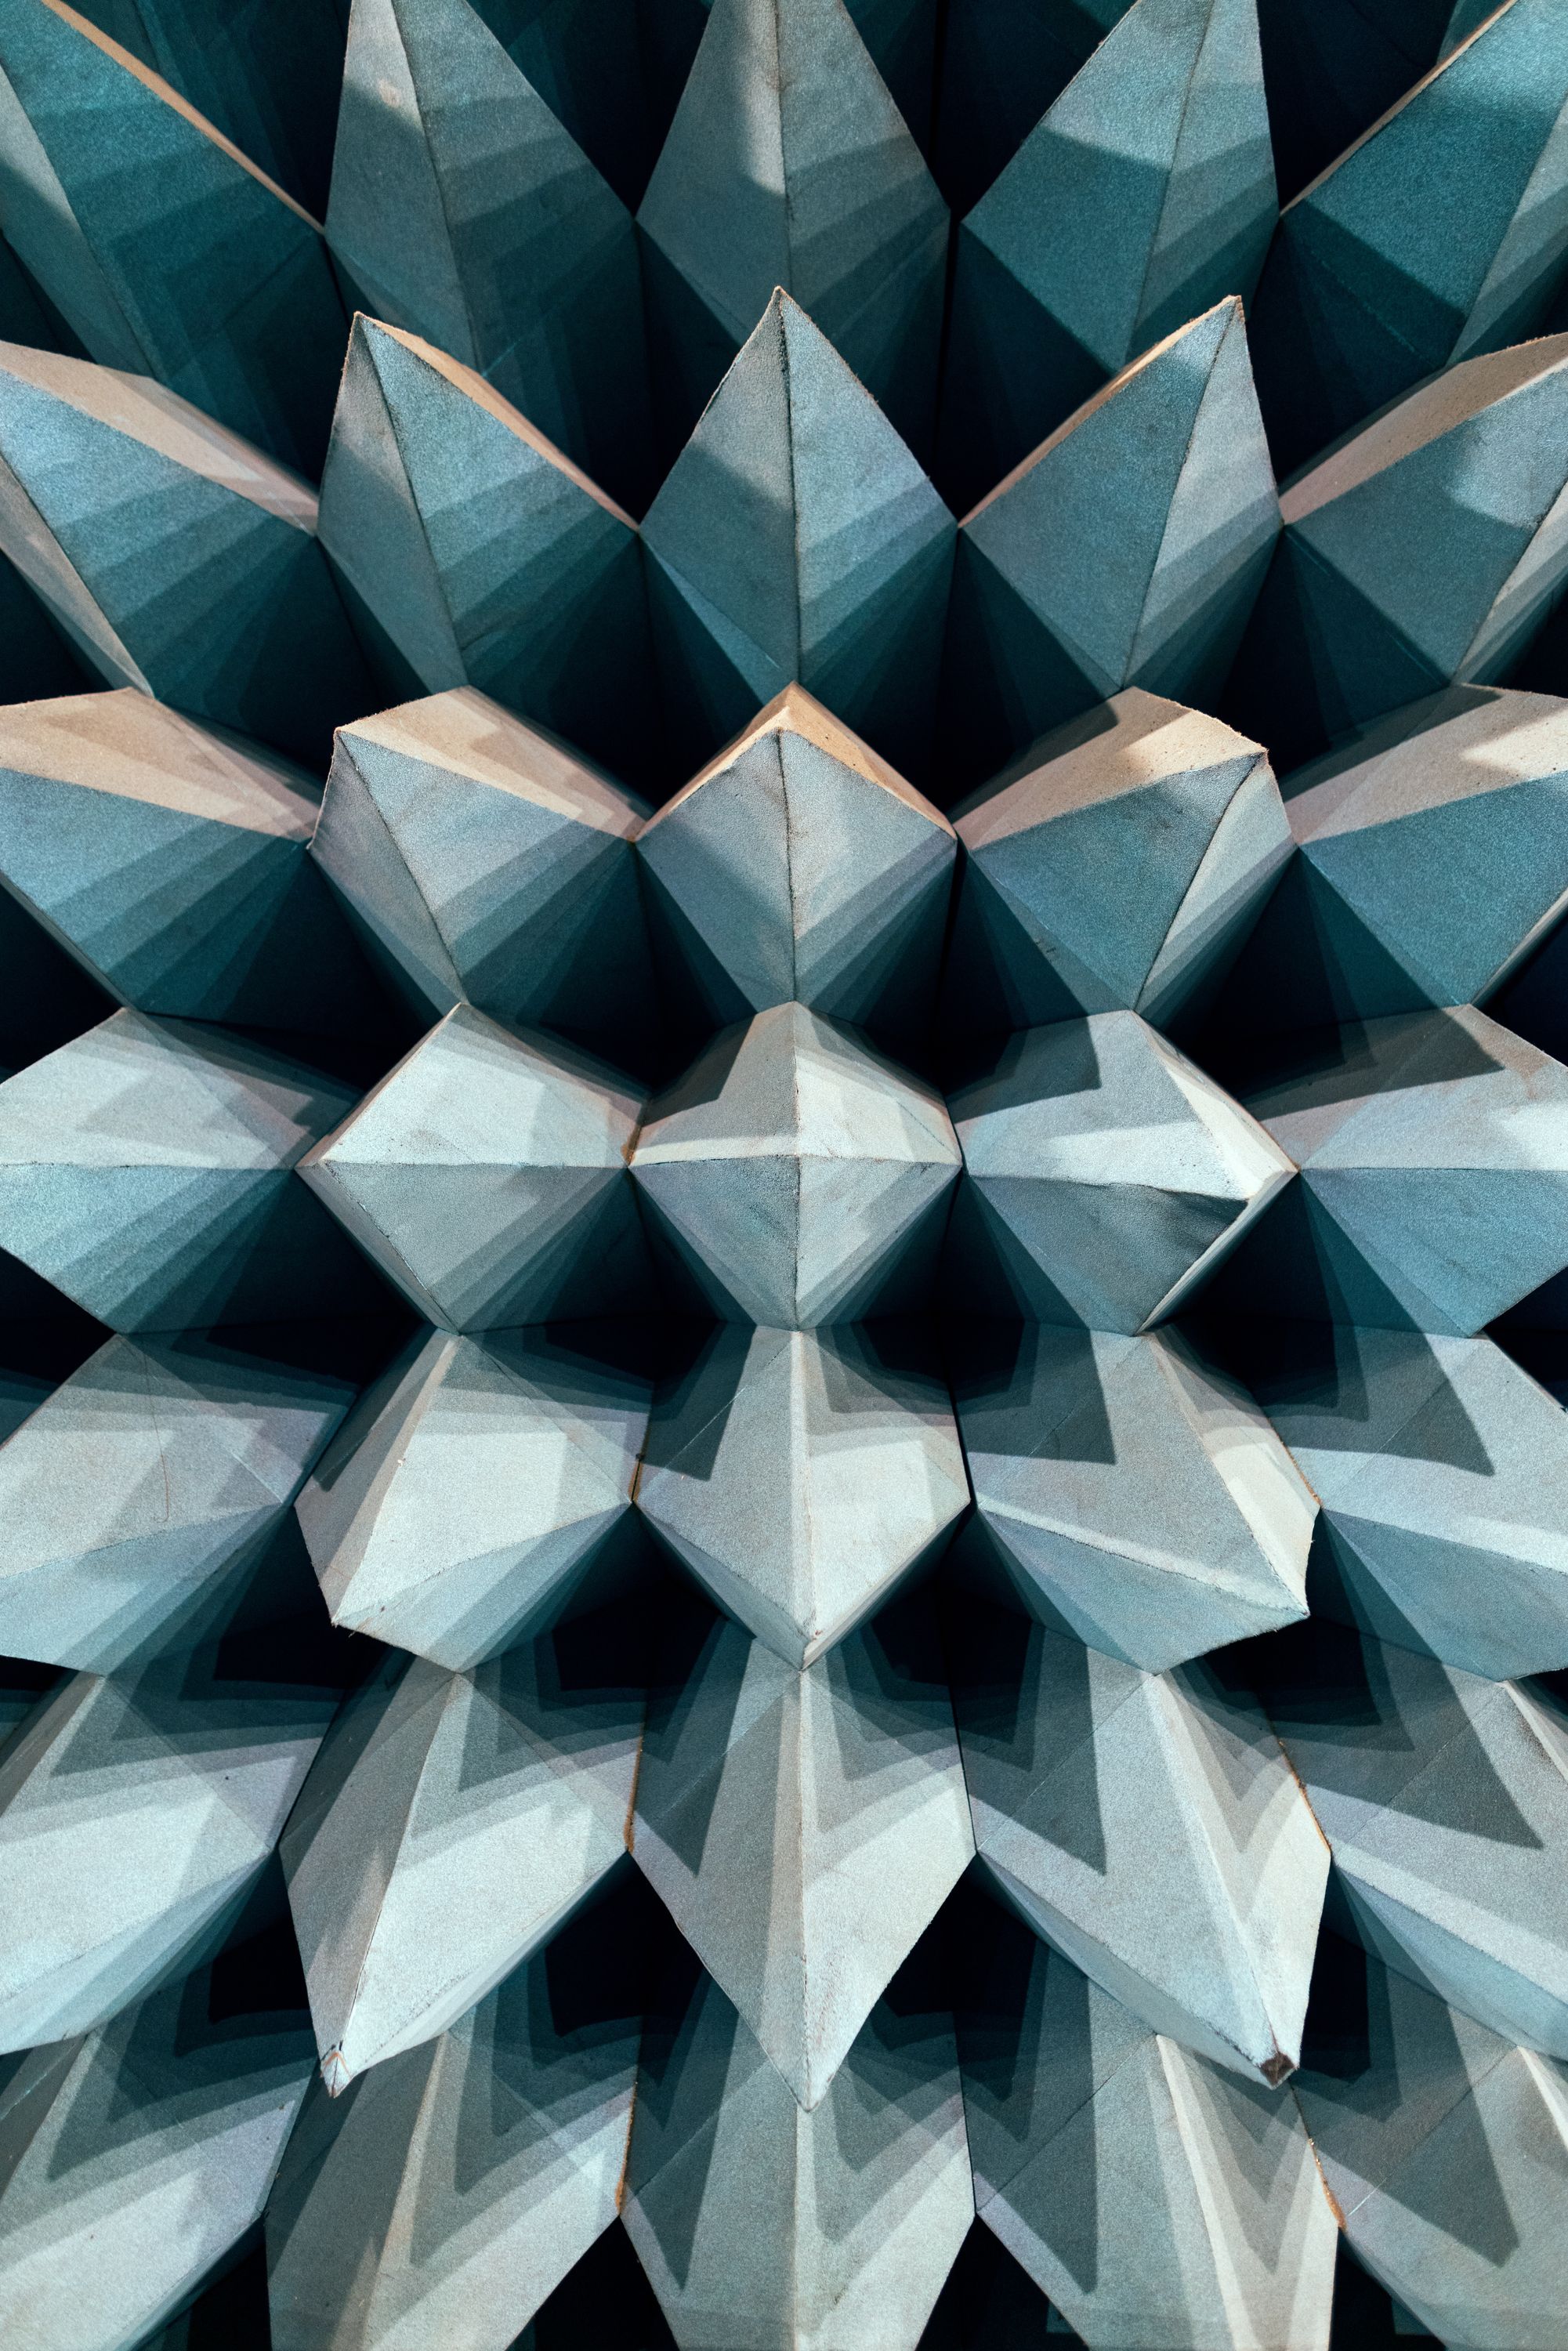 Anechoic chamber by This is Engineering RAEng on Unsplash